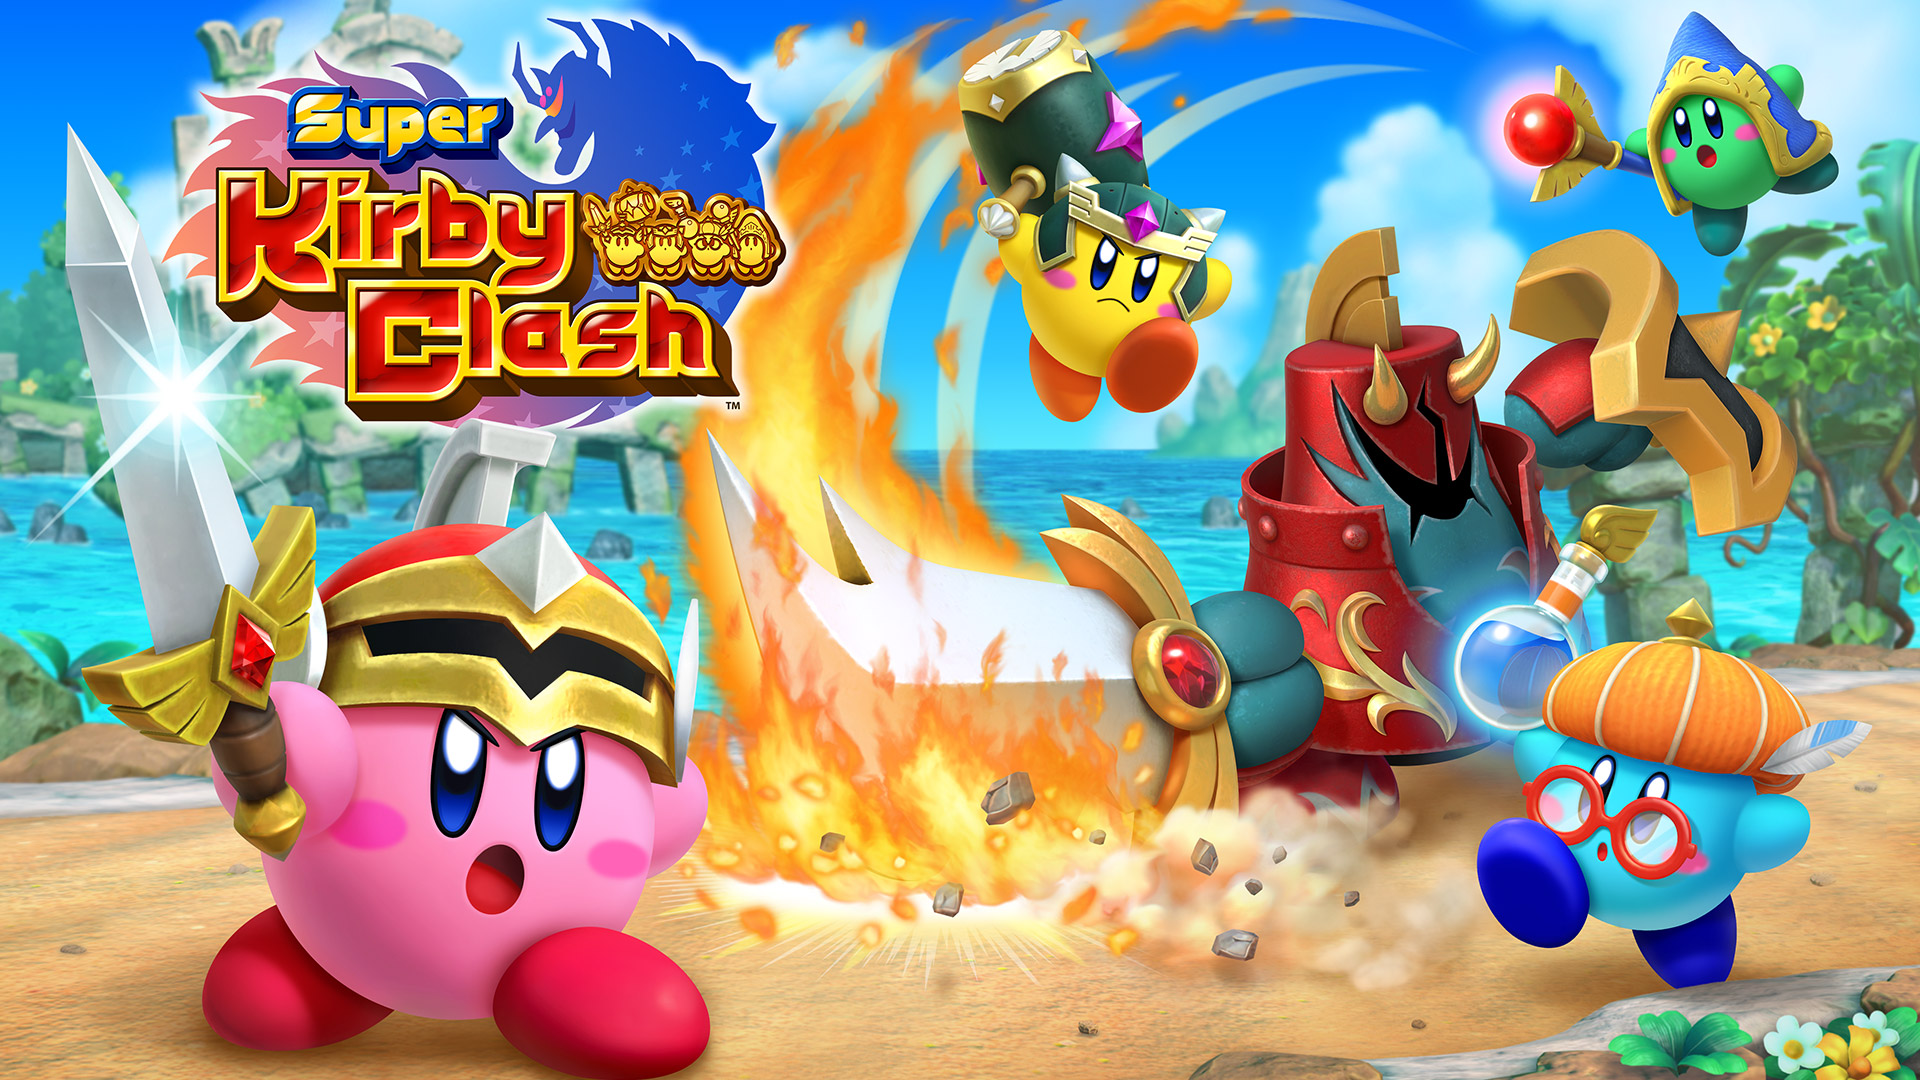 Super Kirby Clash - Codex Gamicus - Humanity's collective gaming knowledge  at your fingertips.